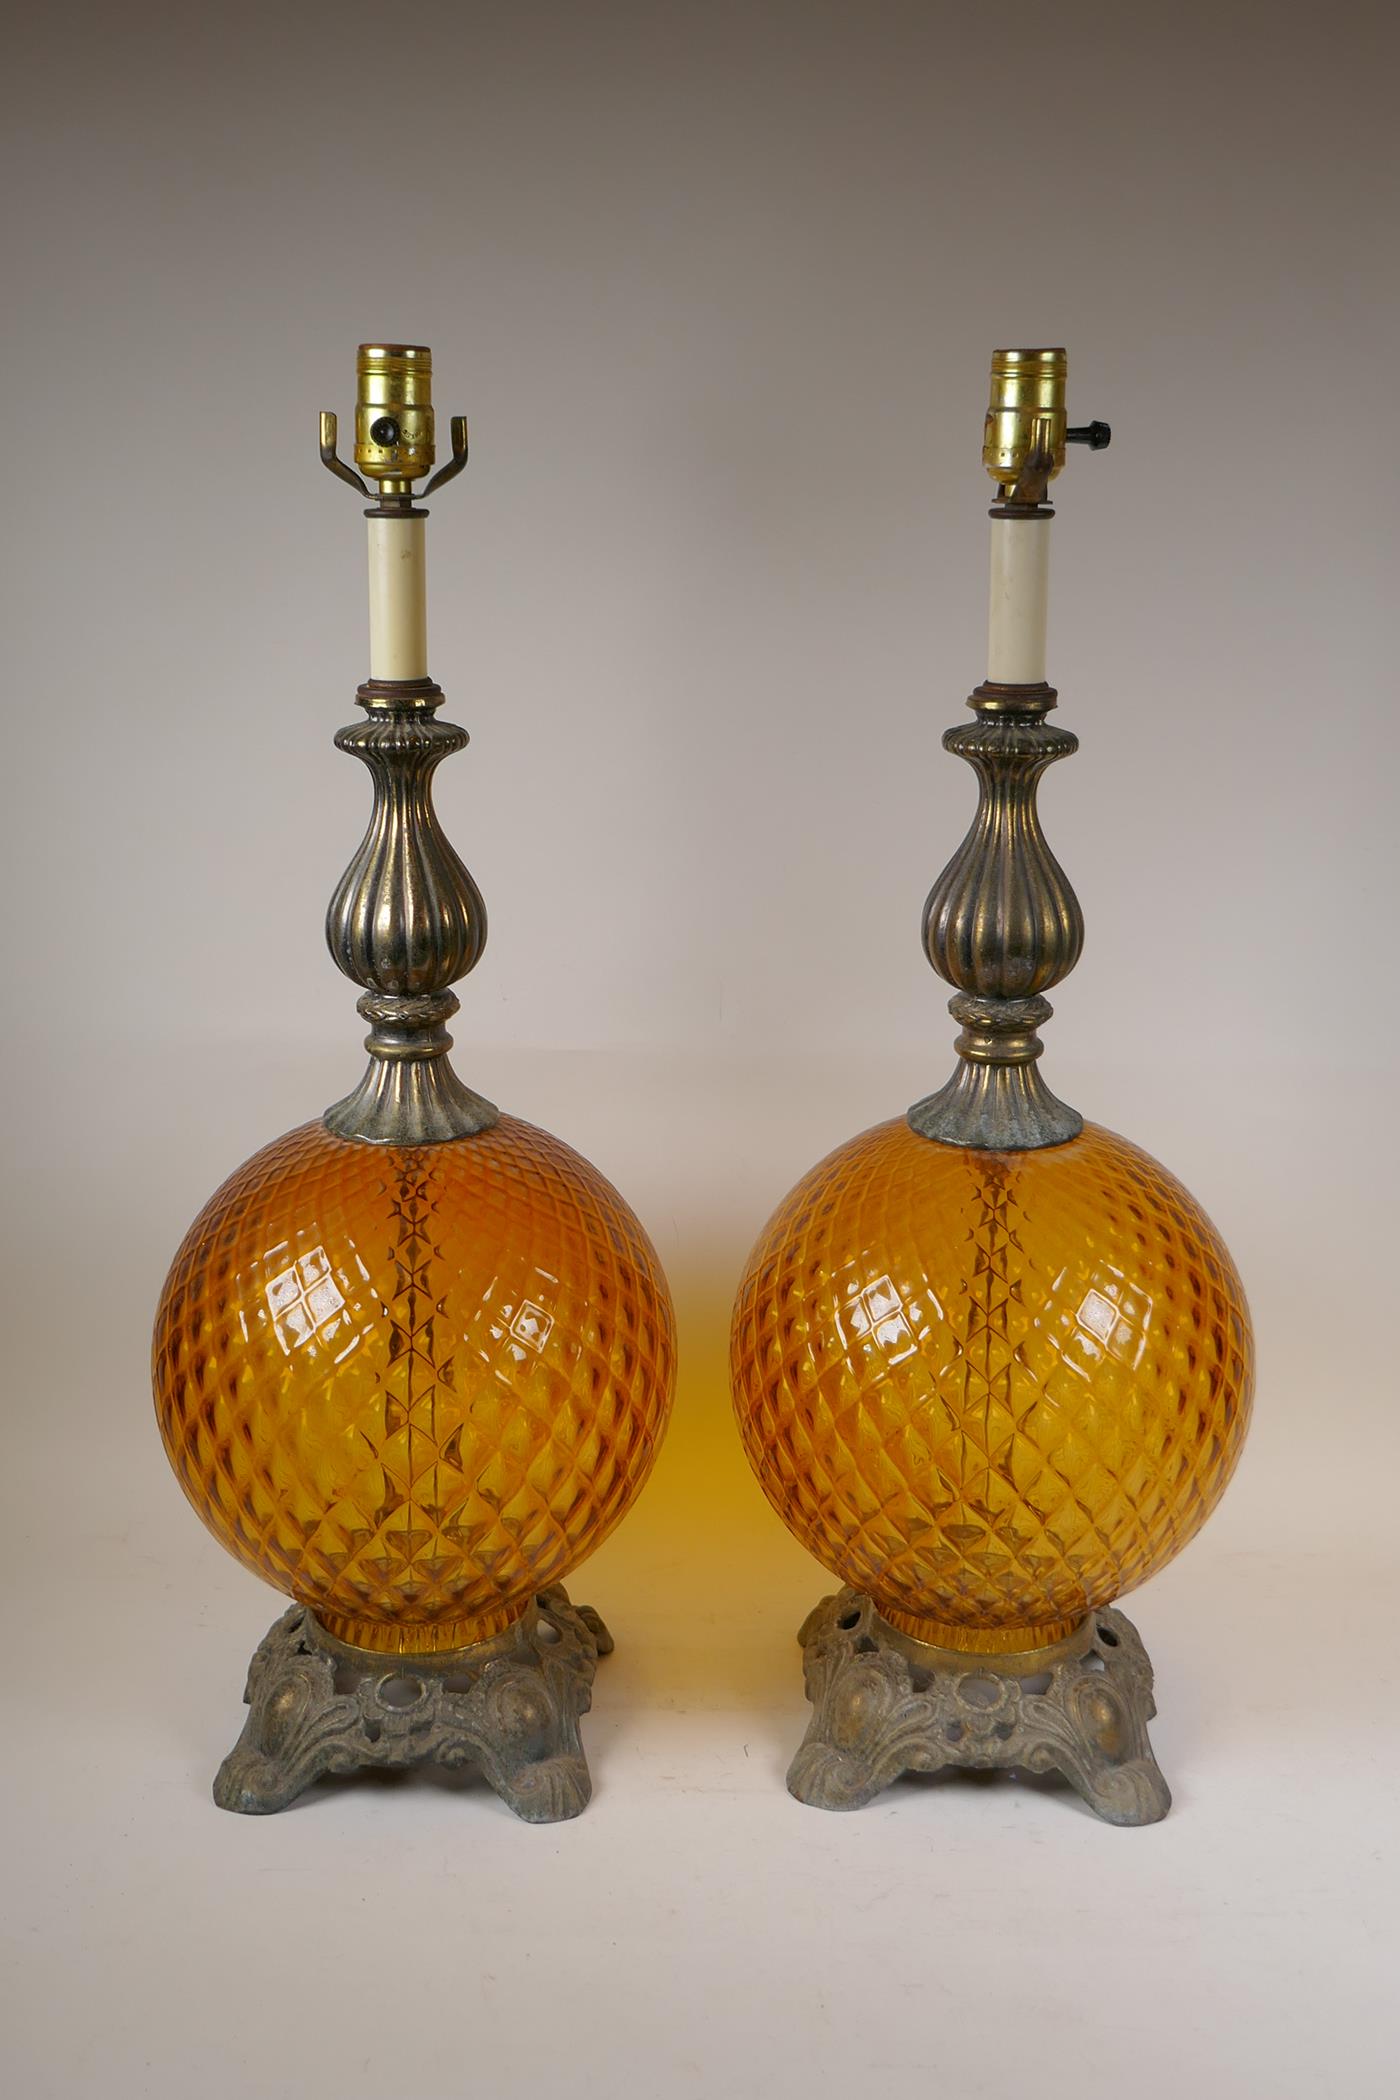 A pair of amber glass and gilt metal mounted lamps, 26" high - Image 2 of 3